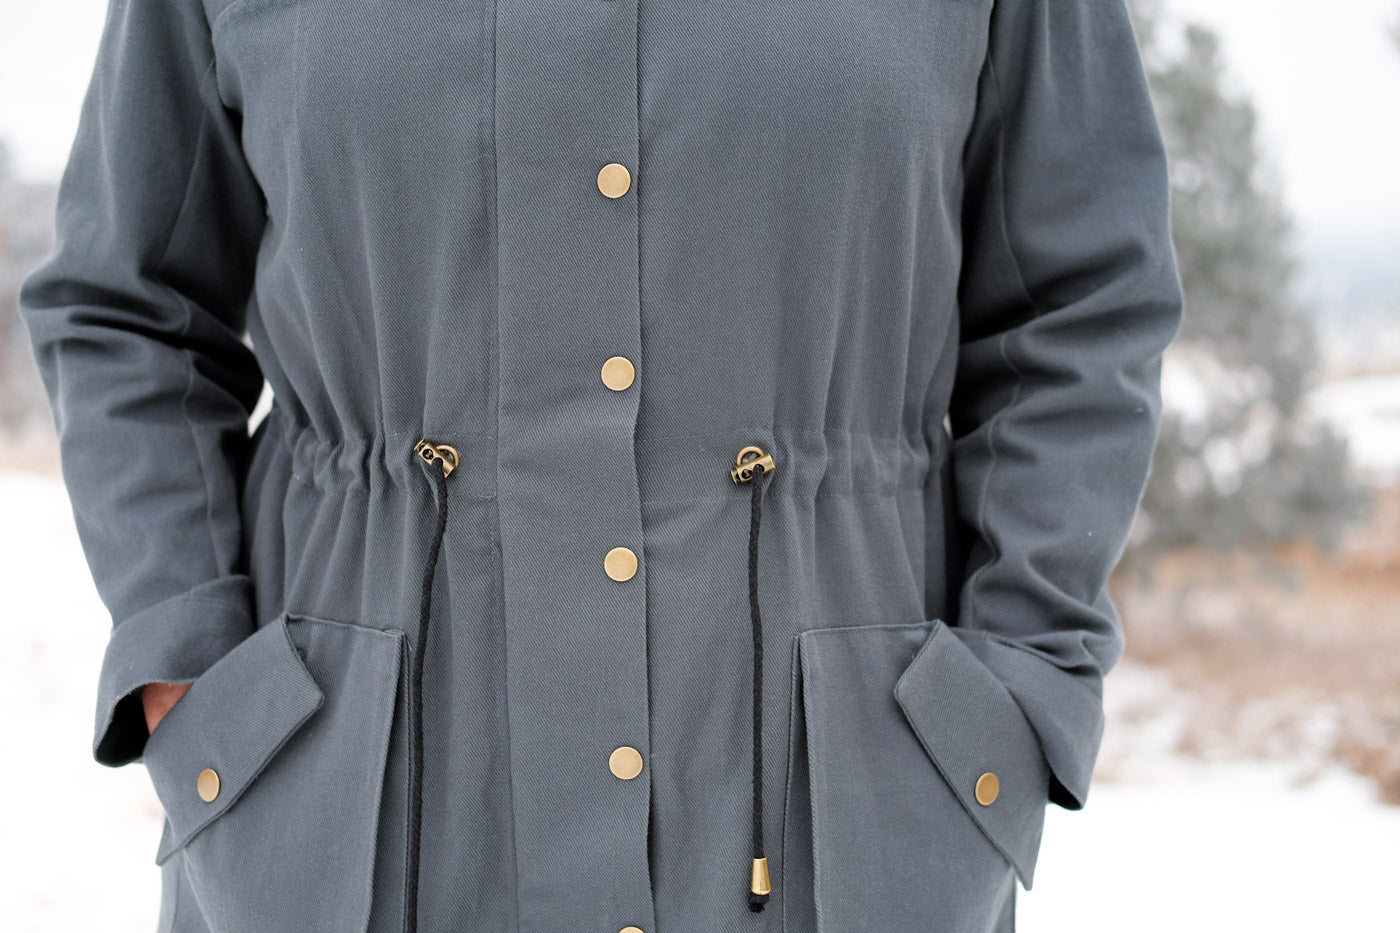 Detail of the Kelly Anorak Hardware